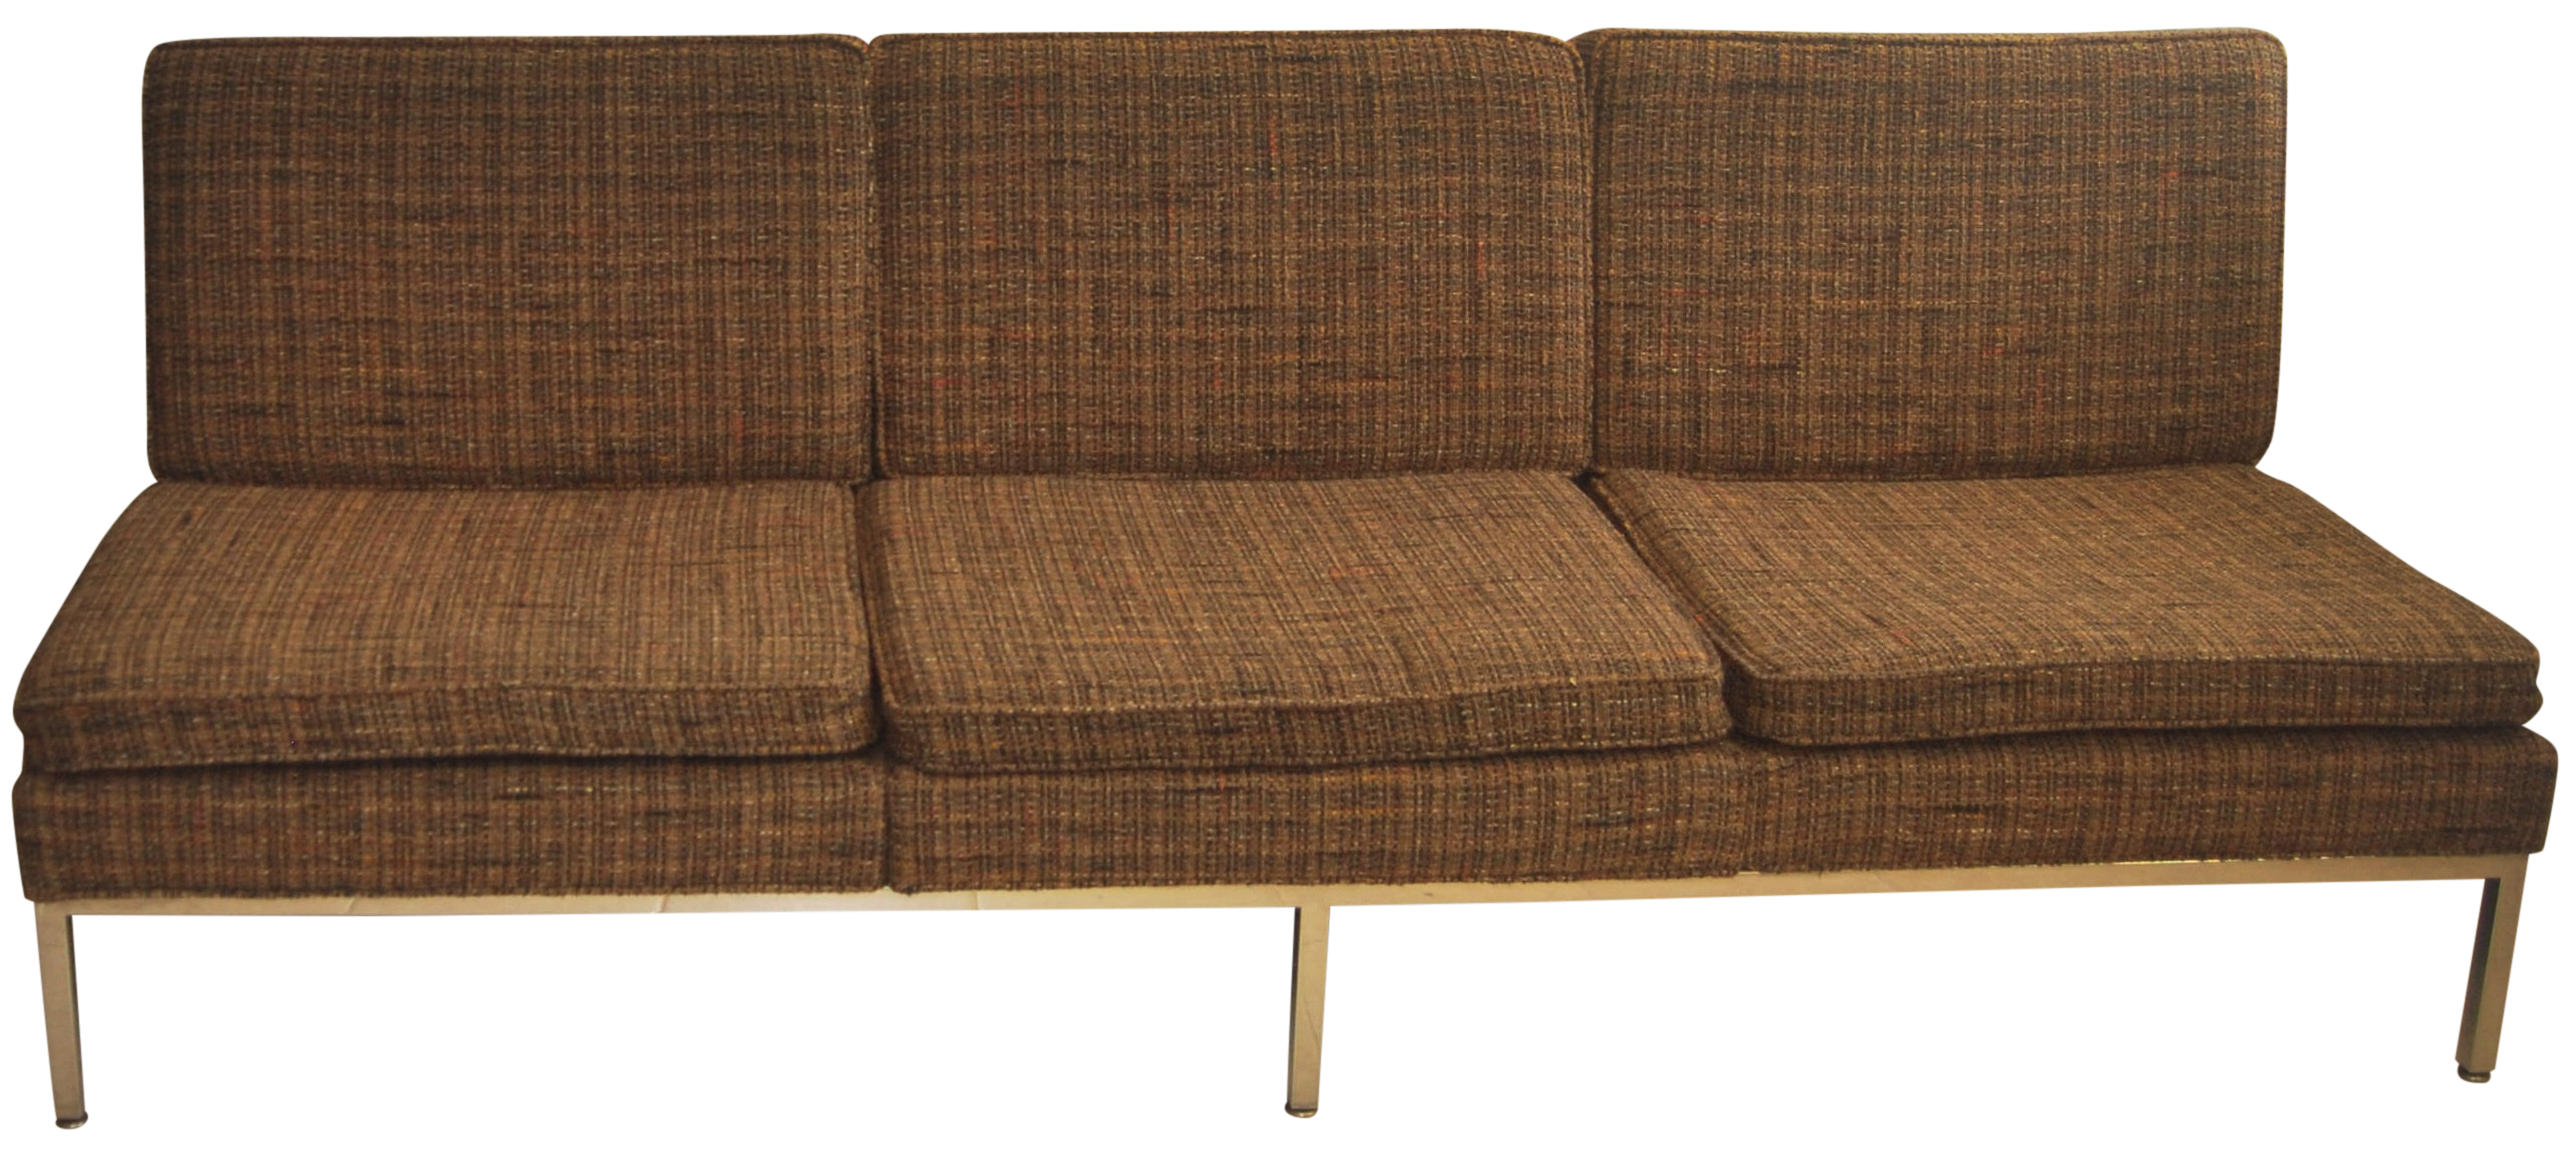 Mid Century 3 Seat Sofa On Chrome Frame | Chairish Three Seat Sofa, Mid Pertaining To Mid Century 3 Seat Couches (View 15 of 20)